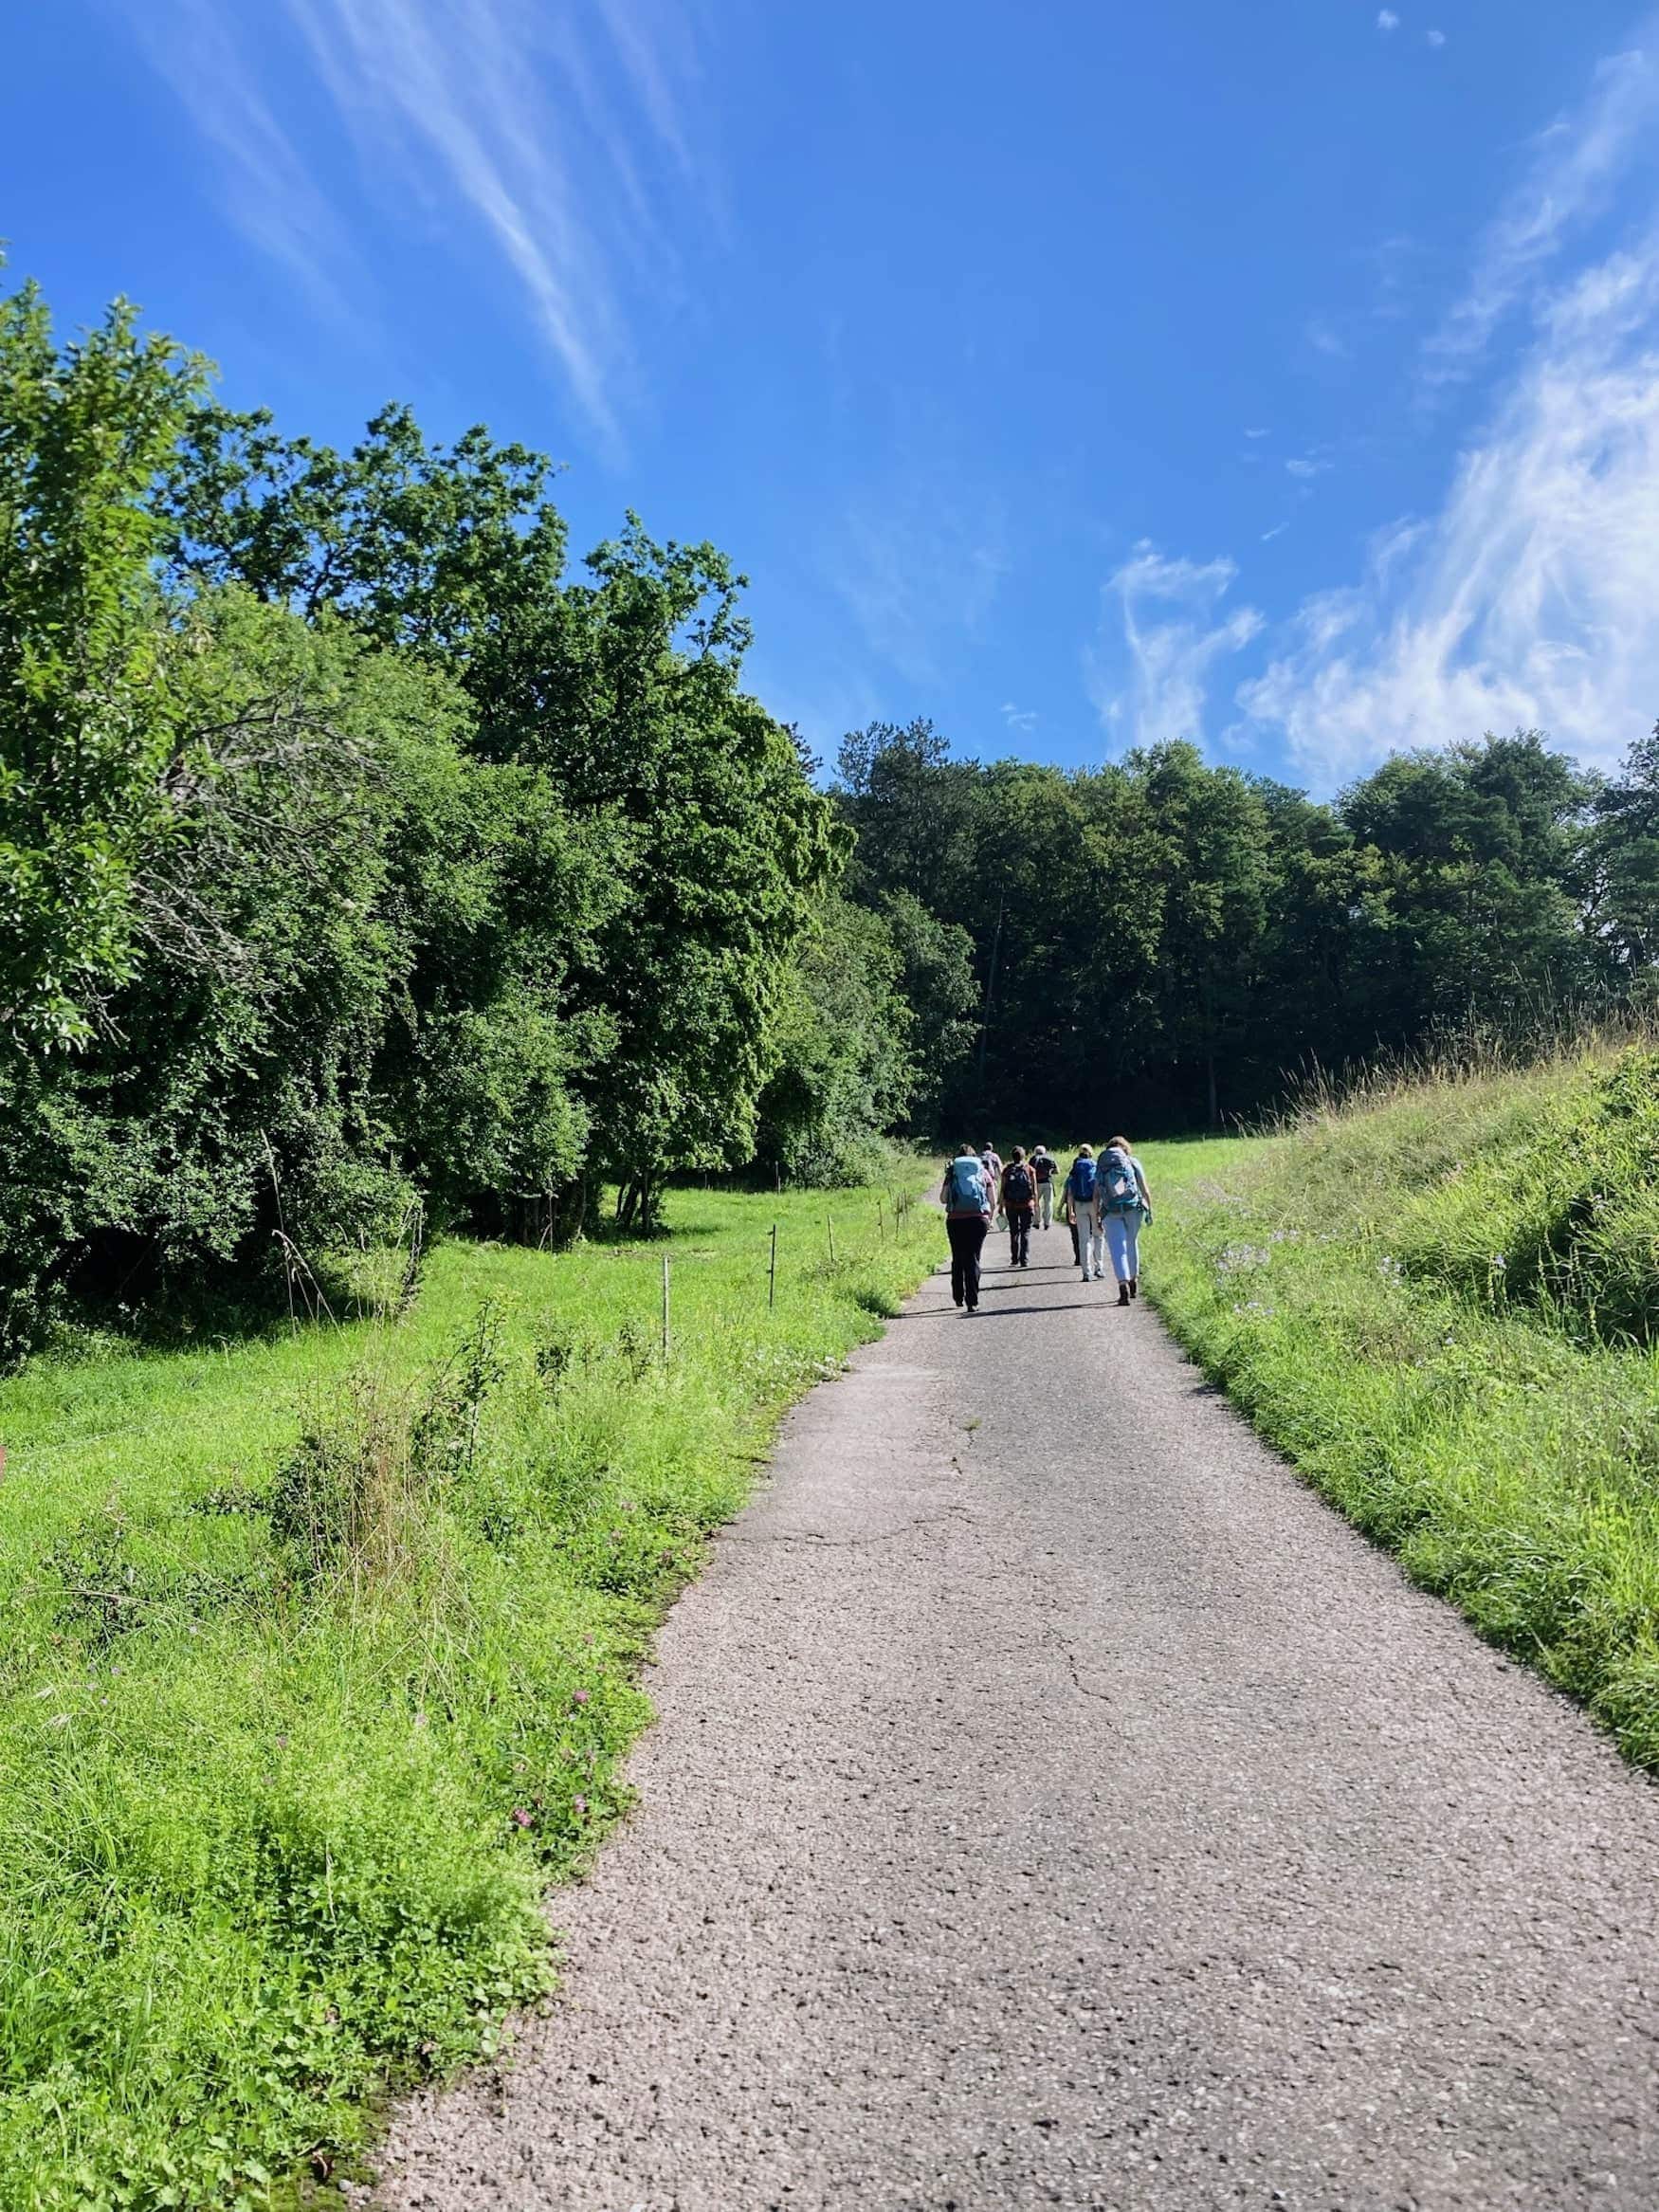 Hikers on a path in the Odenwald on a sunny day